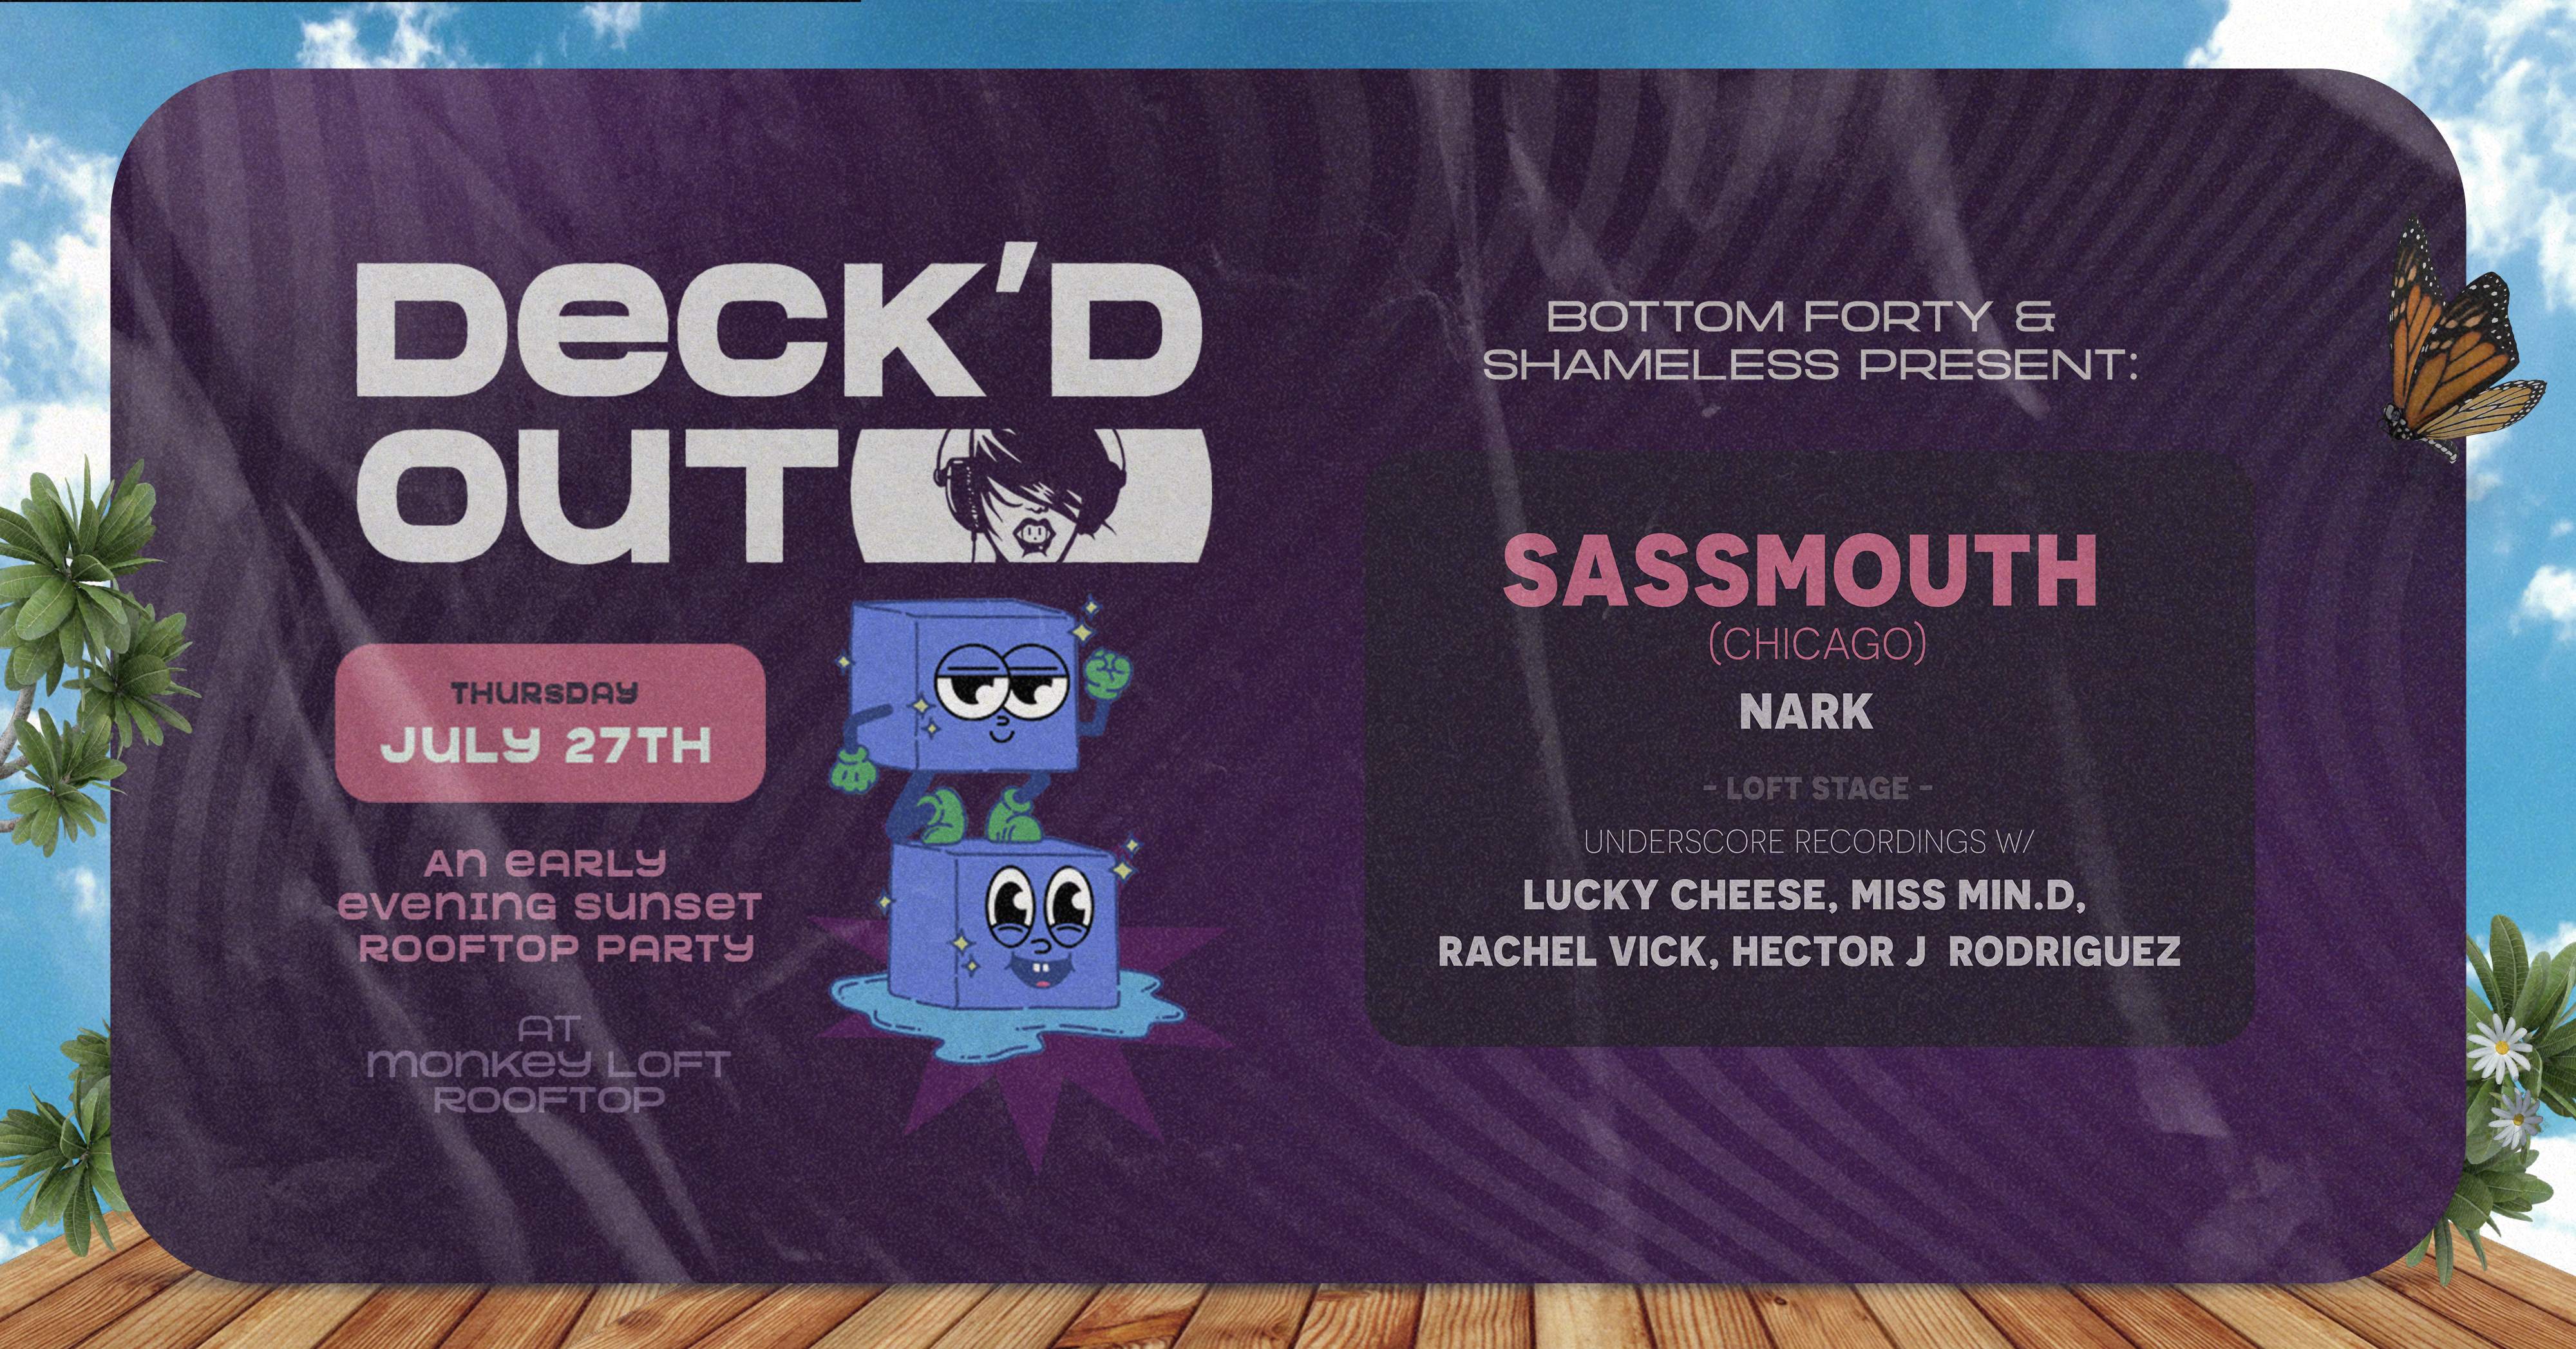 Deck'd Out #5 with Sassmouth (Chicago), Nark & Underscore Recordings - Página frontal